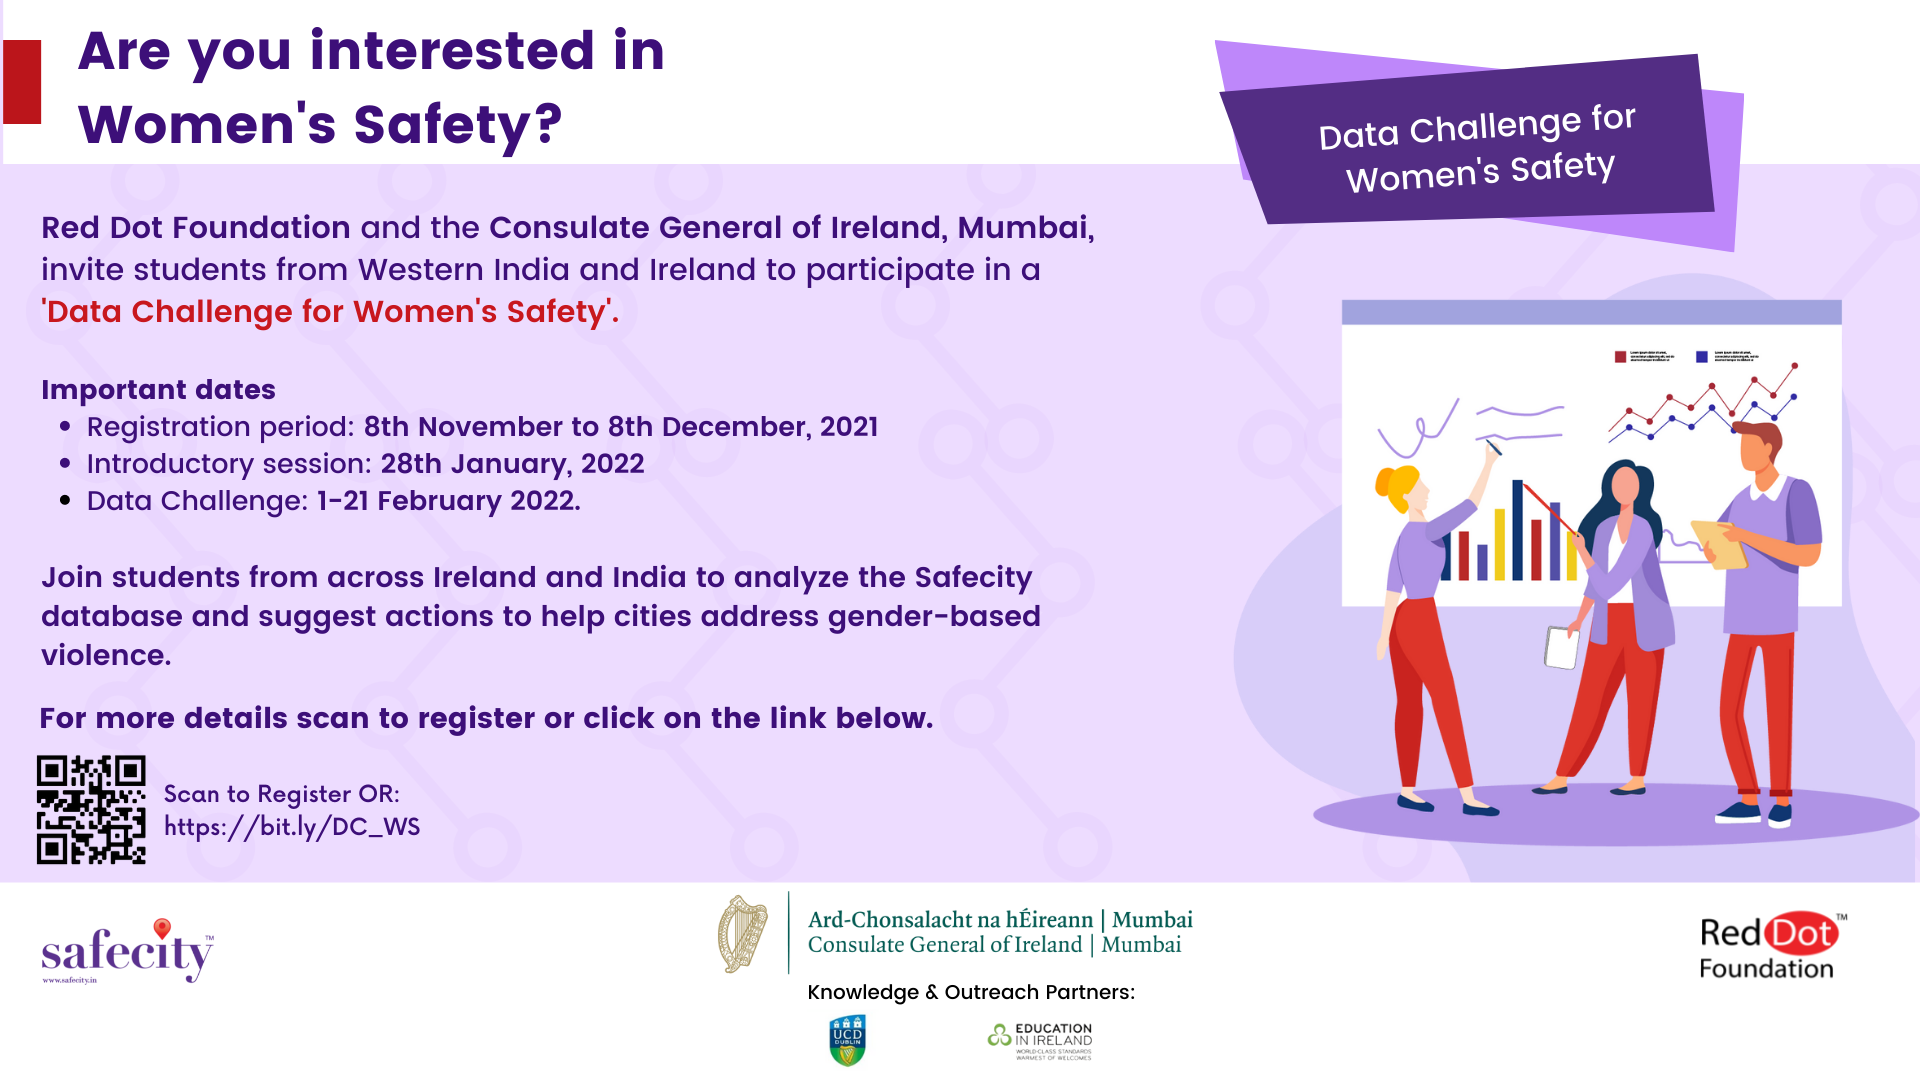 CG Mumbai and Red Dot Foundation partner to host a Data Challenge on Women's Safety